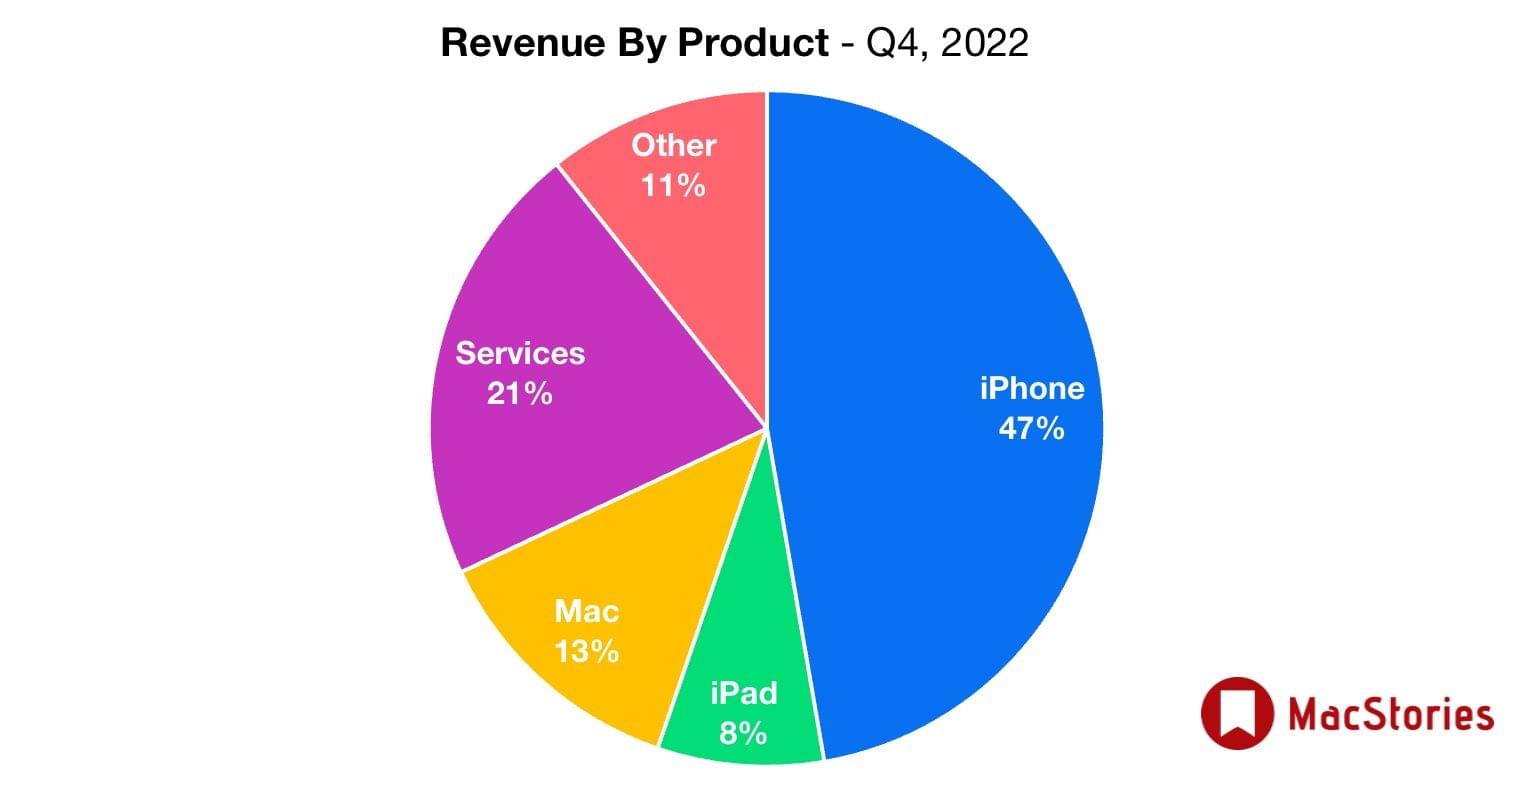 Mac had a good quarter, while iPad sales were down a bit, changing the overall mix of the company's revenue sources.